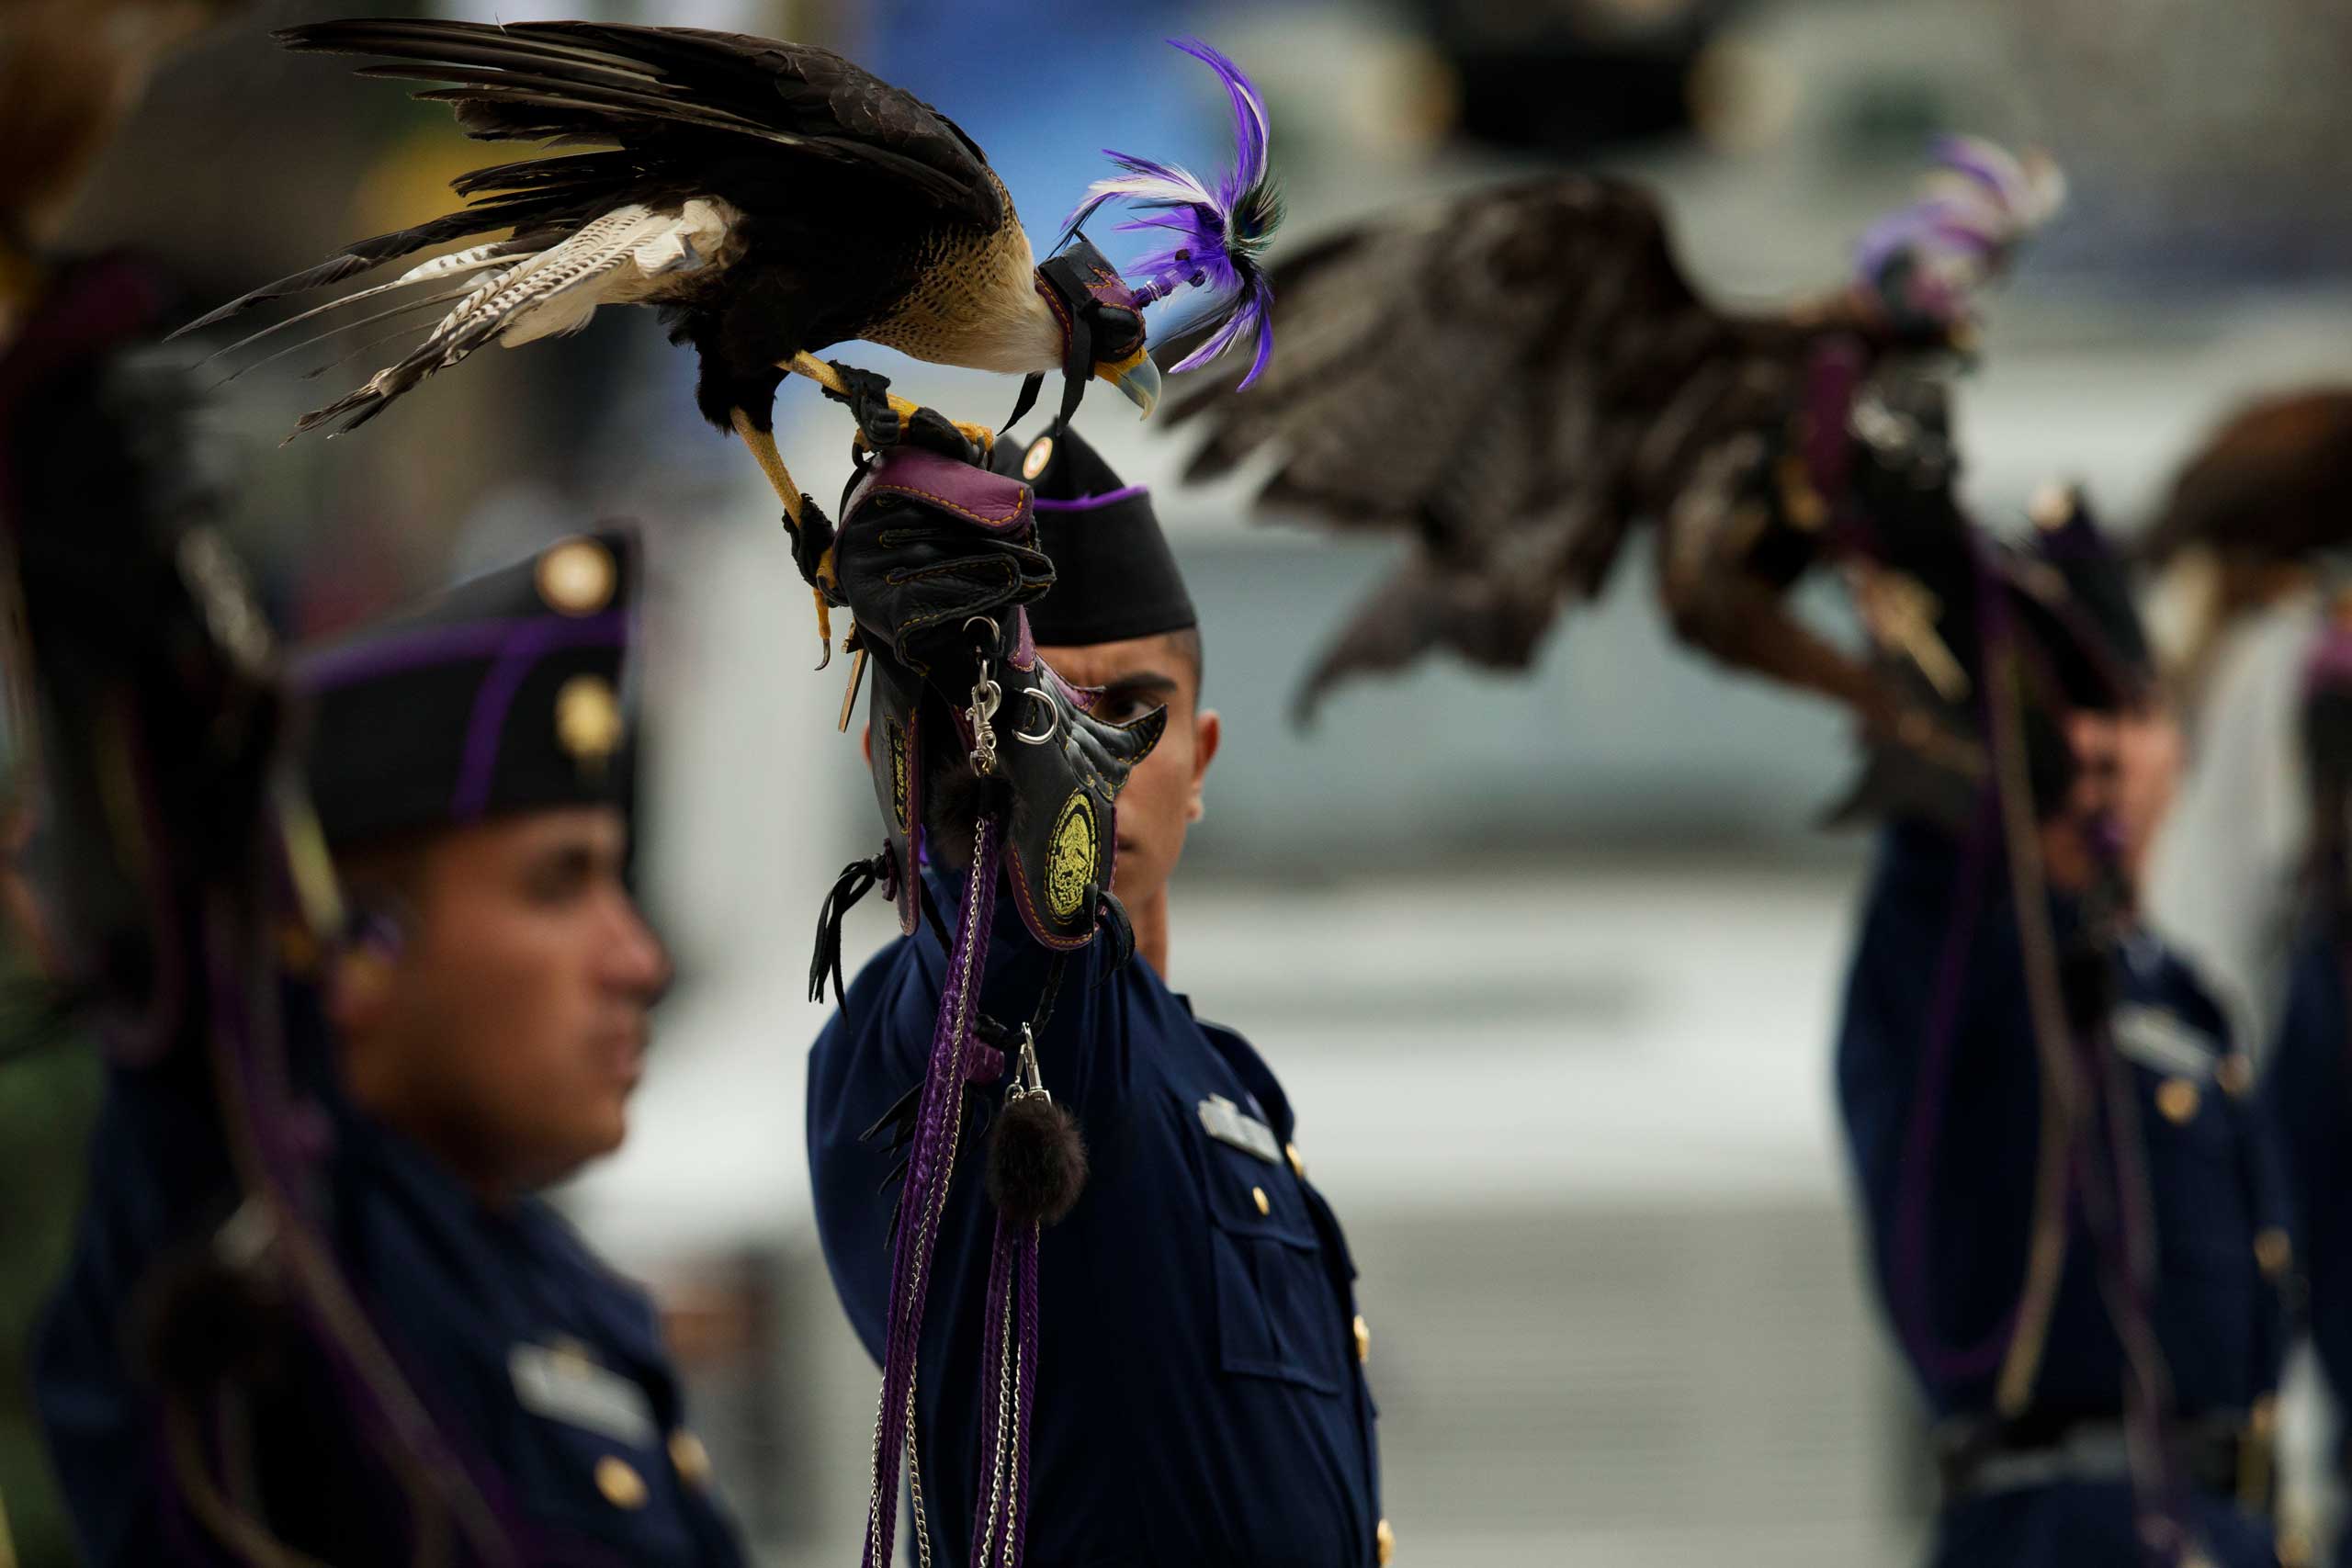 Sept. 16, 2014. A member of the Air Force carrying a predatory bird looks toward the President as they march past the National Palace during an annual Independence Day parade by Mexico's Armed Forces in central Mexico City.